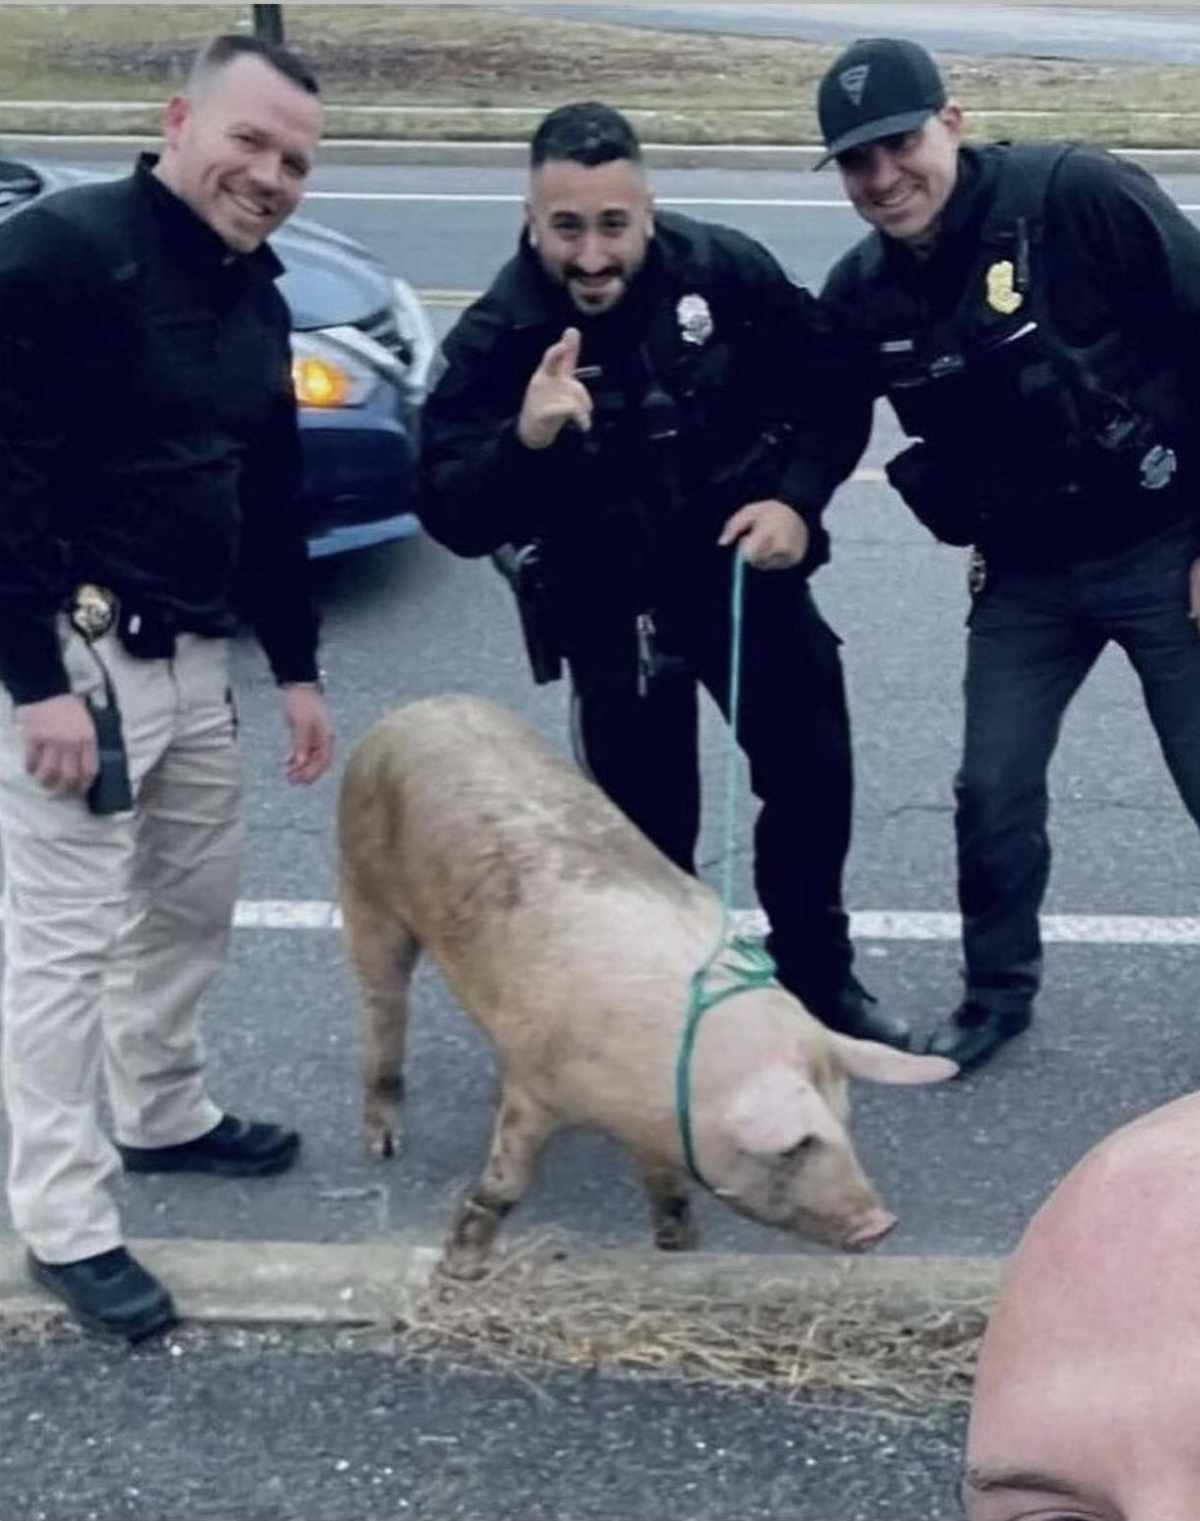 Escaped pig “Albert Einswine” leads NJ police on 14 mile chase